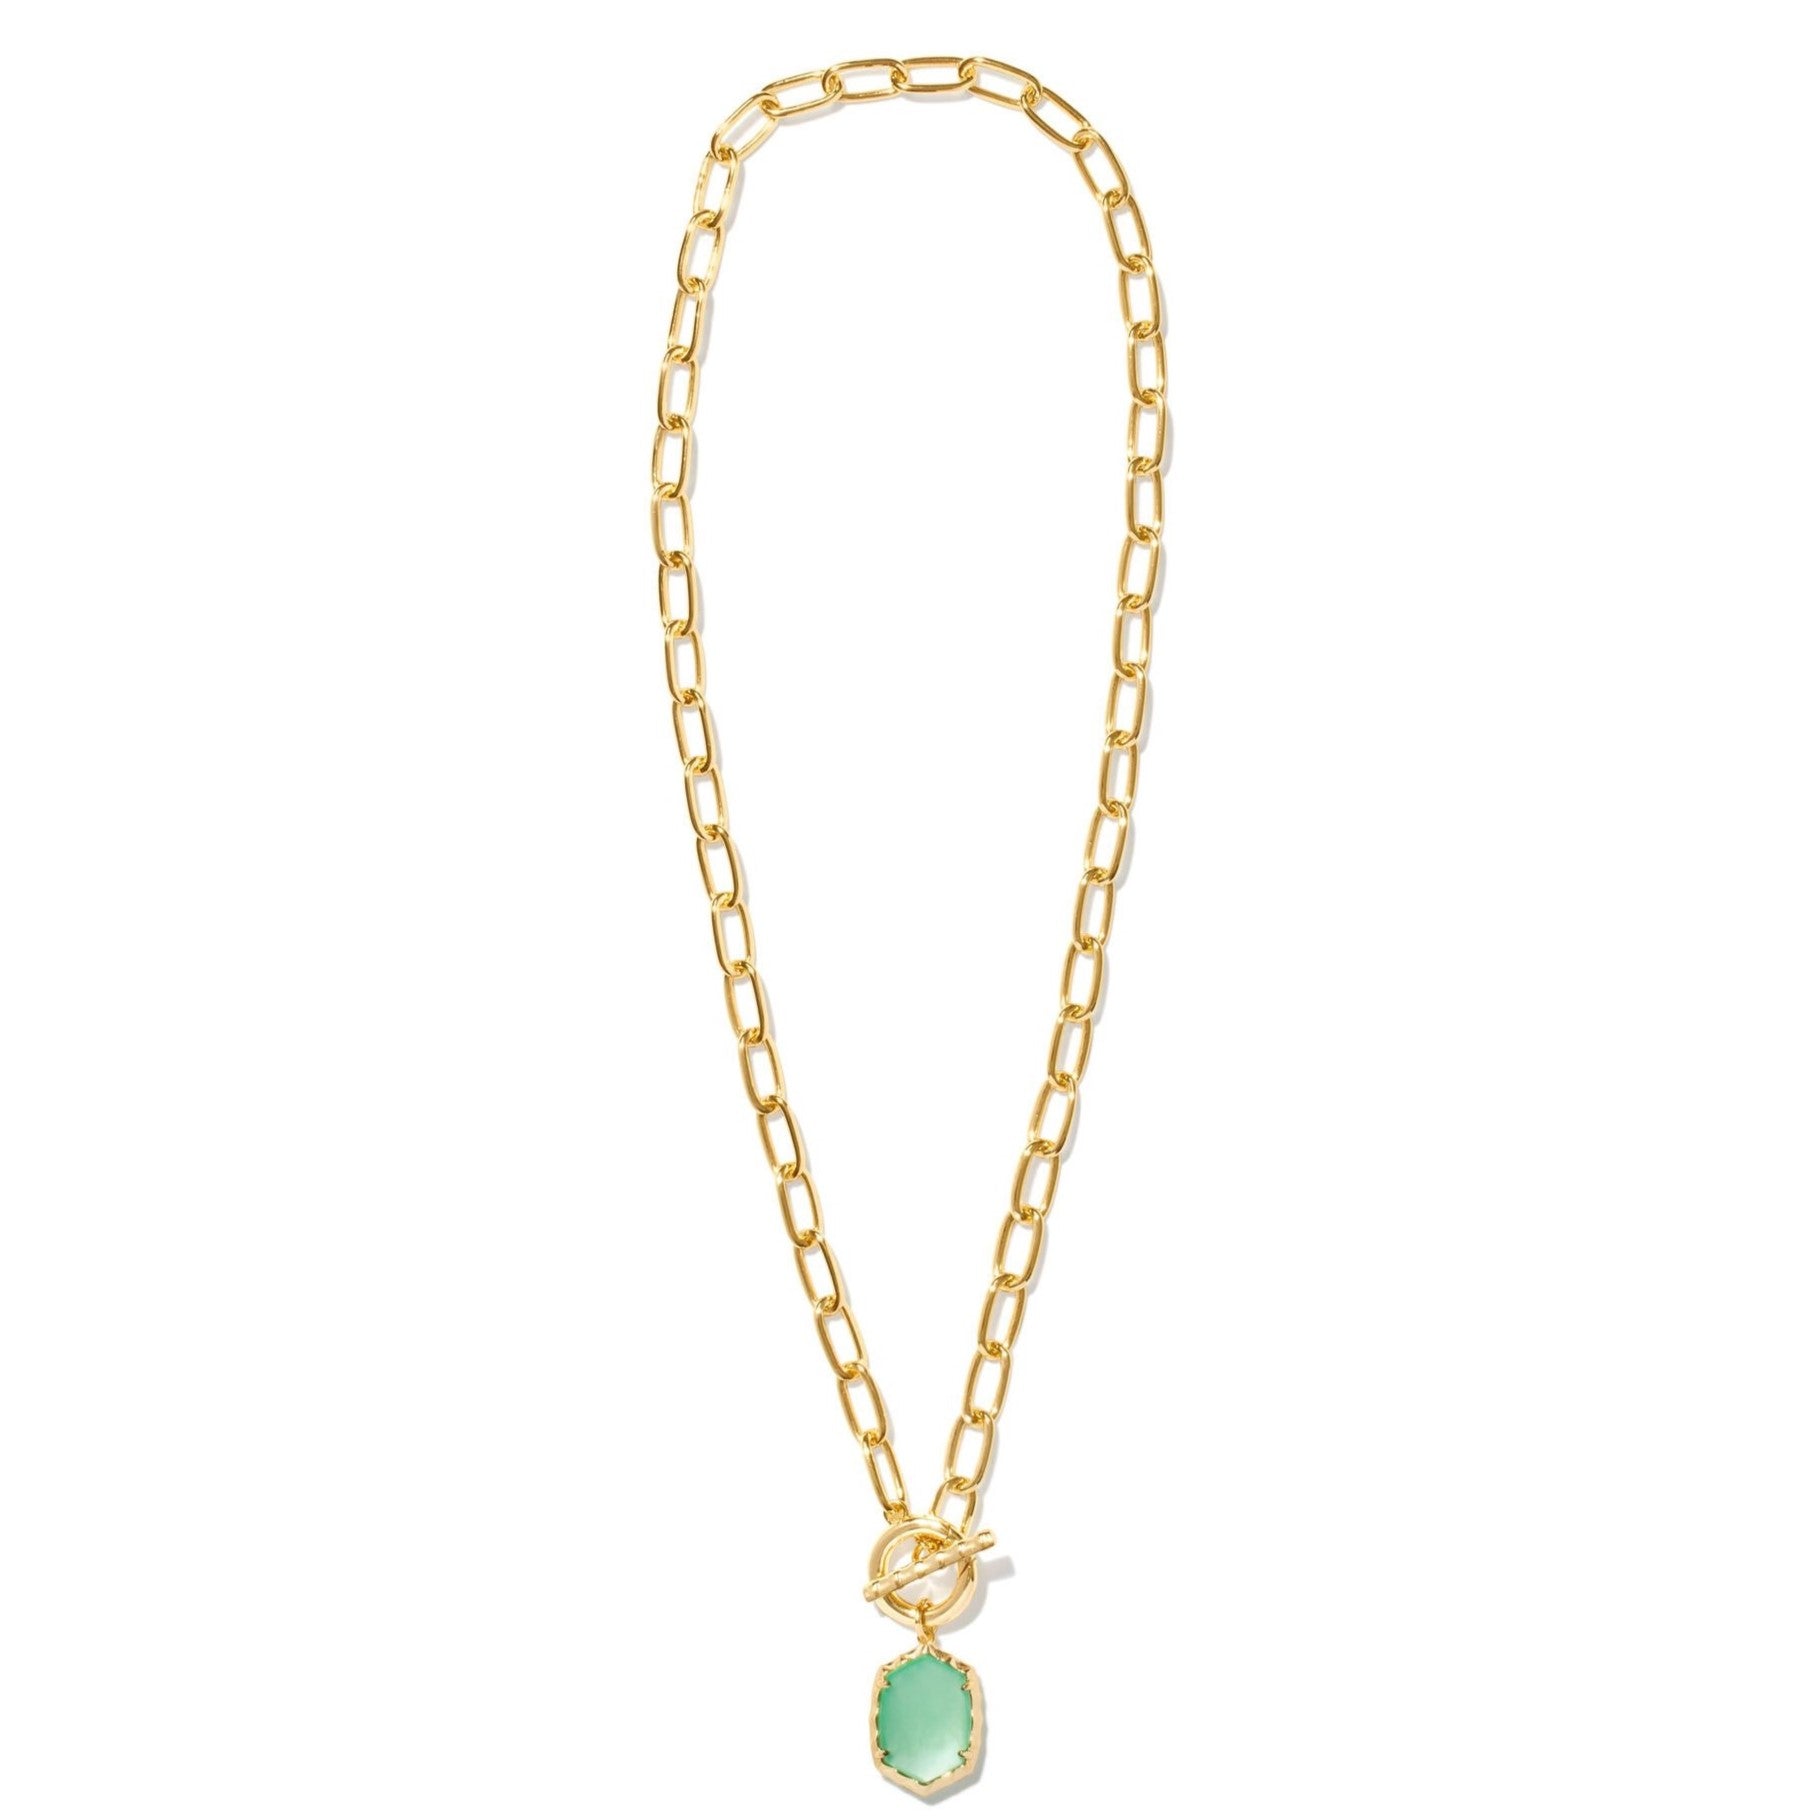 Kendra Scott | Daphne Gold Link and Chain Necklace in Light Green Mother of Pearl - Giddy Up Glamour Boutique